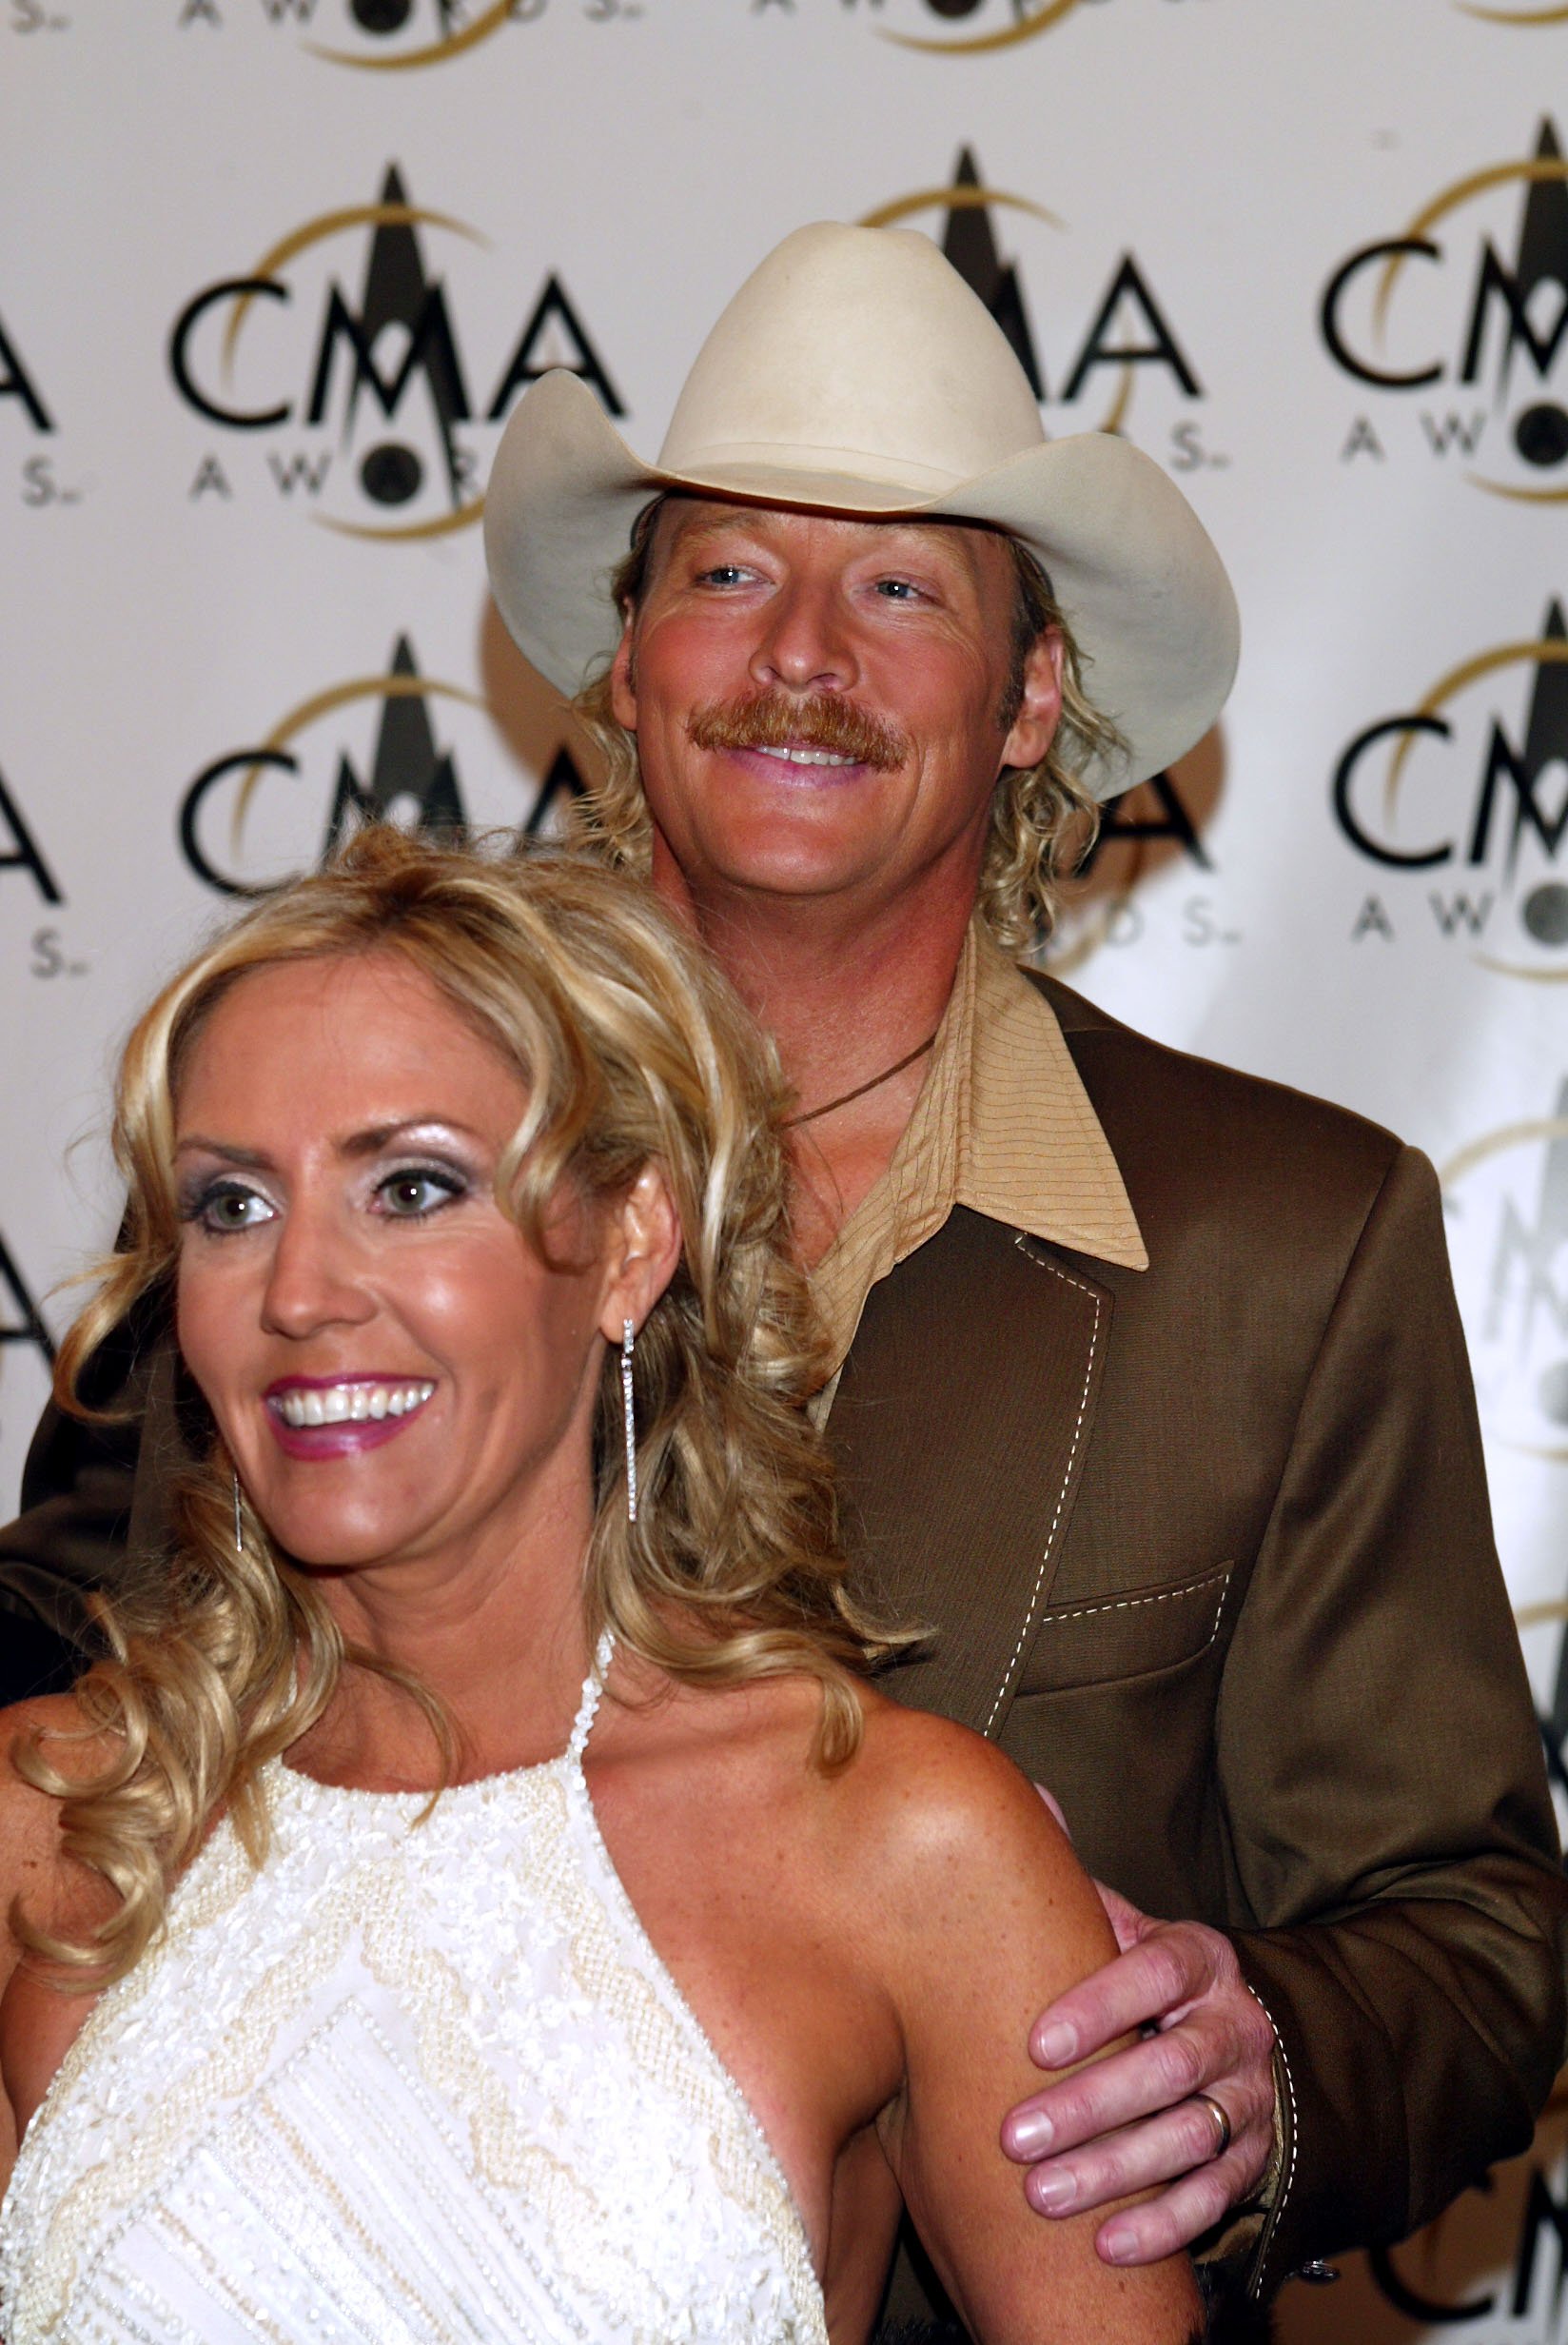 Alan Jackson and his wife Denise attend the 36th annual Country Music Association Awards in Nashville, Tennessee on November 6, 2002 | Source: Getty Images